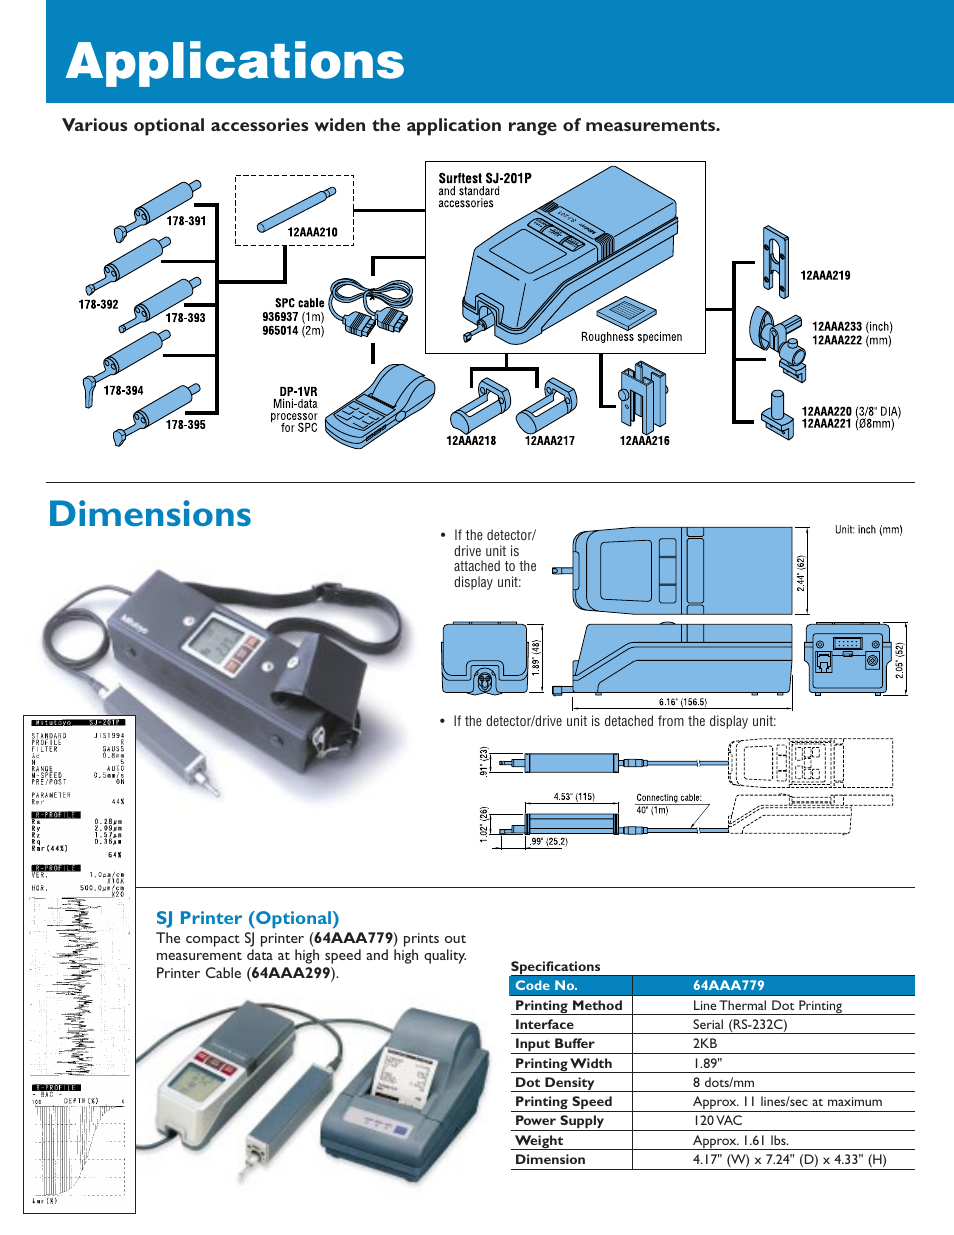 Applications, Dimensions | Atec Mitutoyo-SJ-201P User Manual | Page 3 / 6